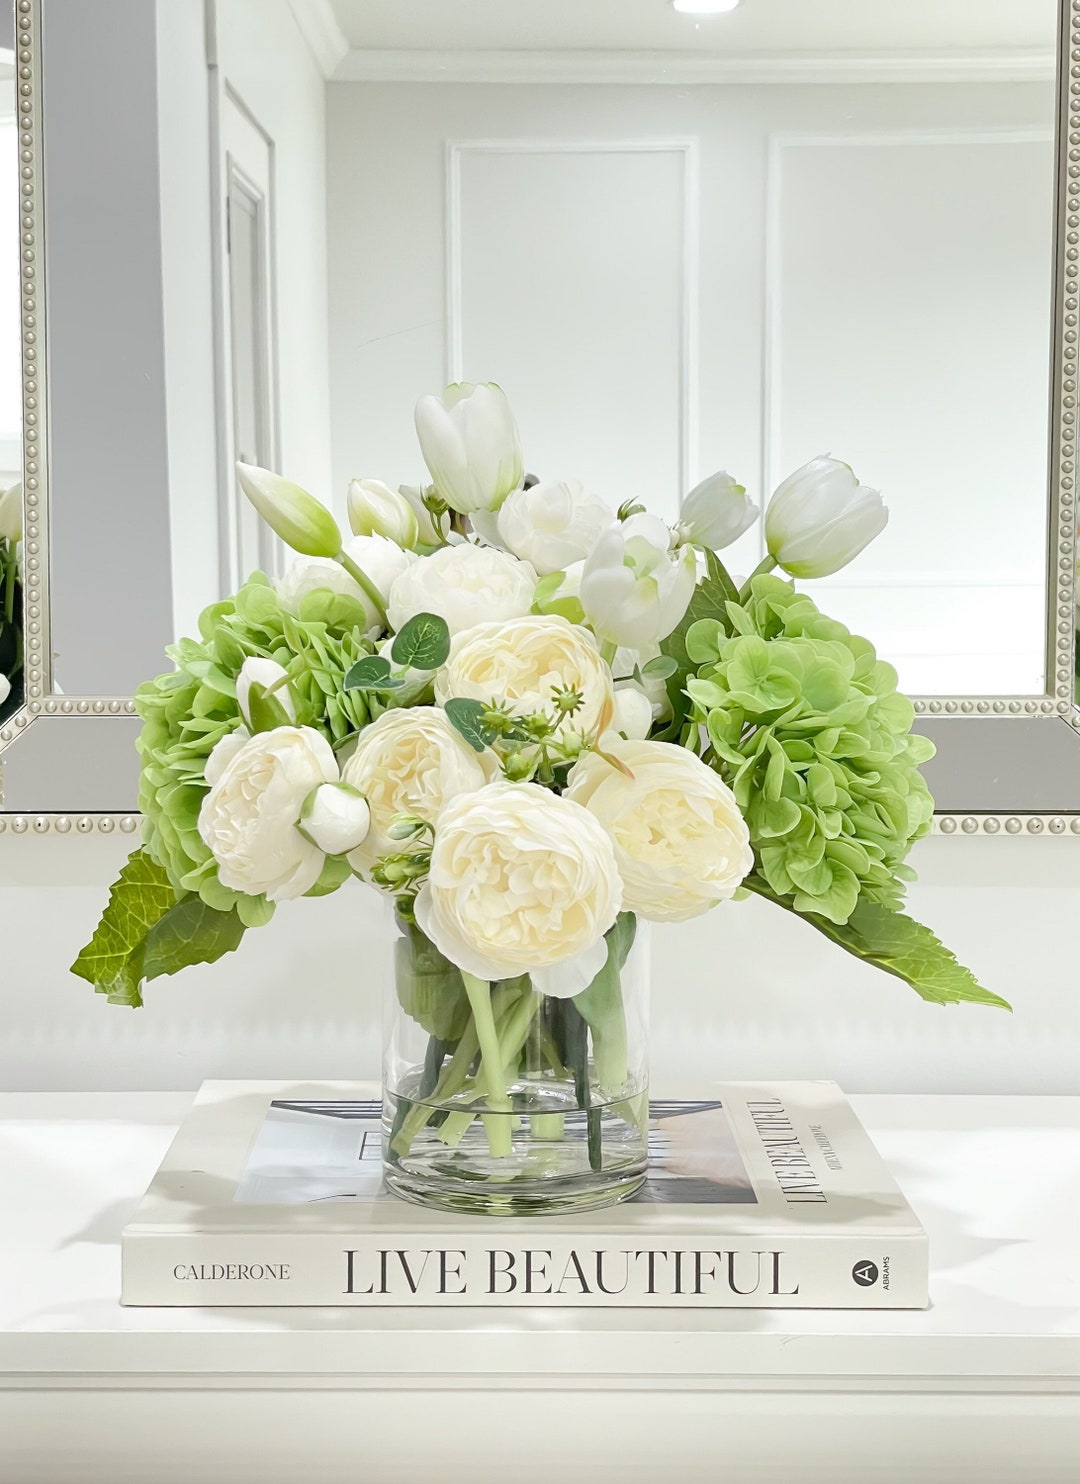 French Country Peony Arrangement in Vase, White Floral Arrangement, Real  Touch Green Hydrangea Centerpiece, White Tulip Peony for Home Decor 